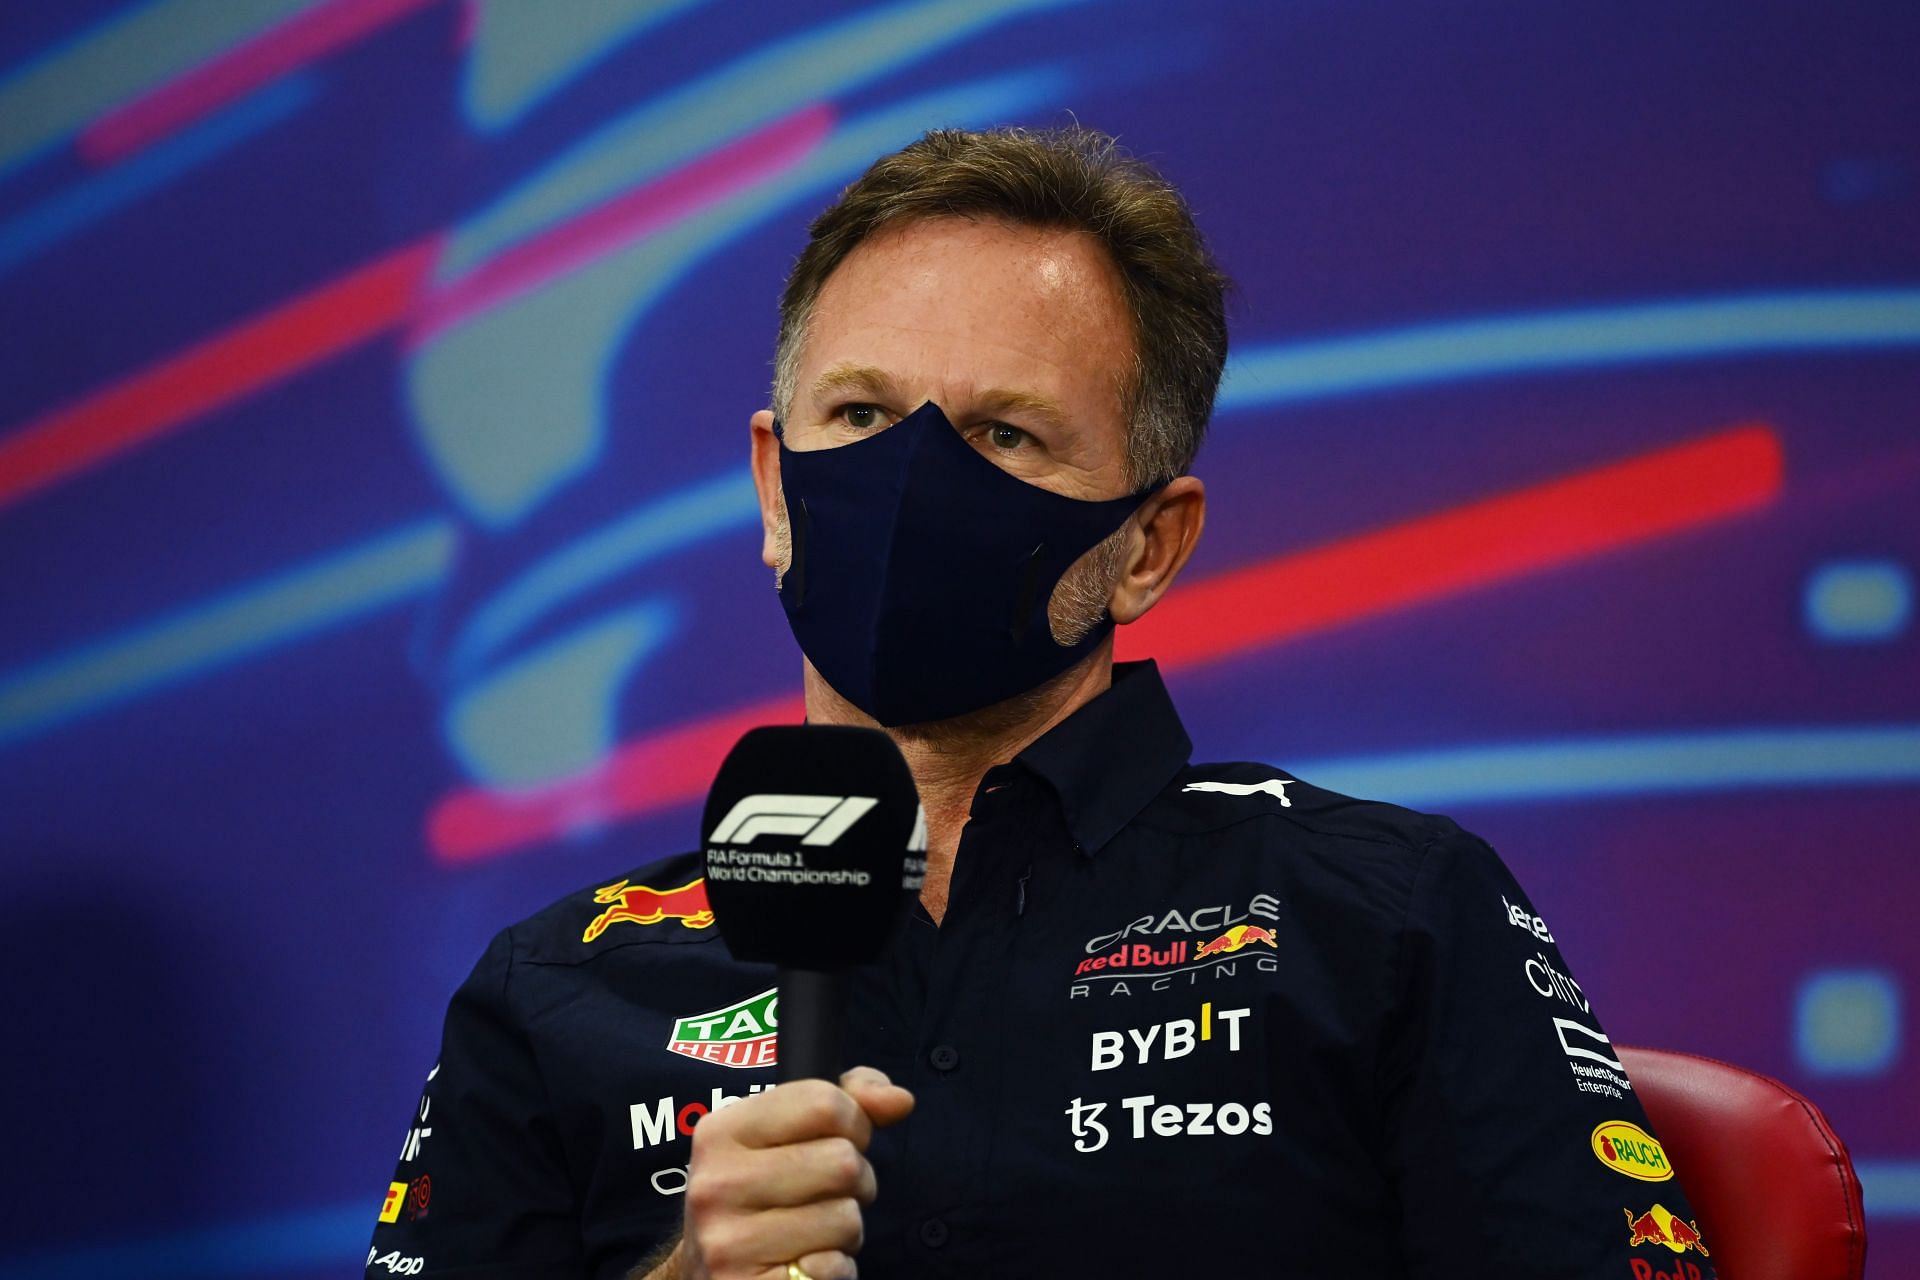 Red Bull team principal Christian Horner in conversation during the pre-race press conference in Bahrain (Photo by Clive Mason/Getty Images)